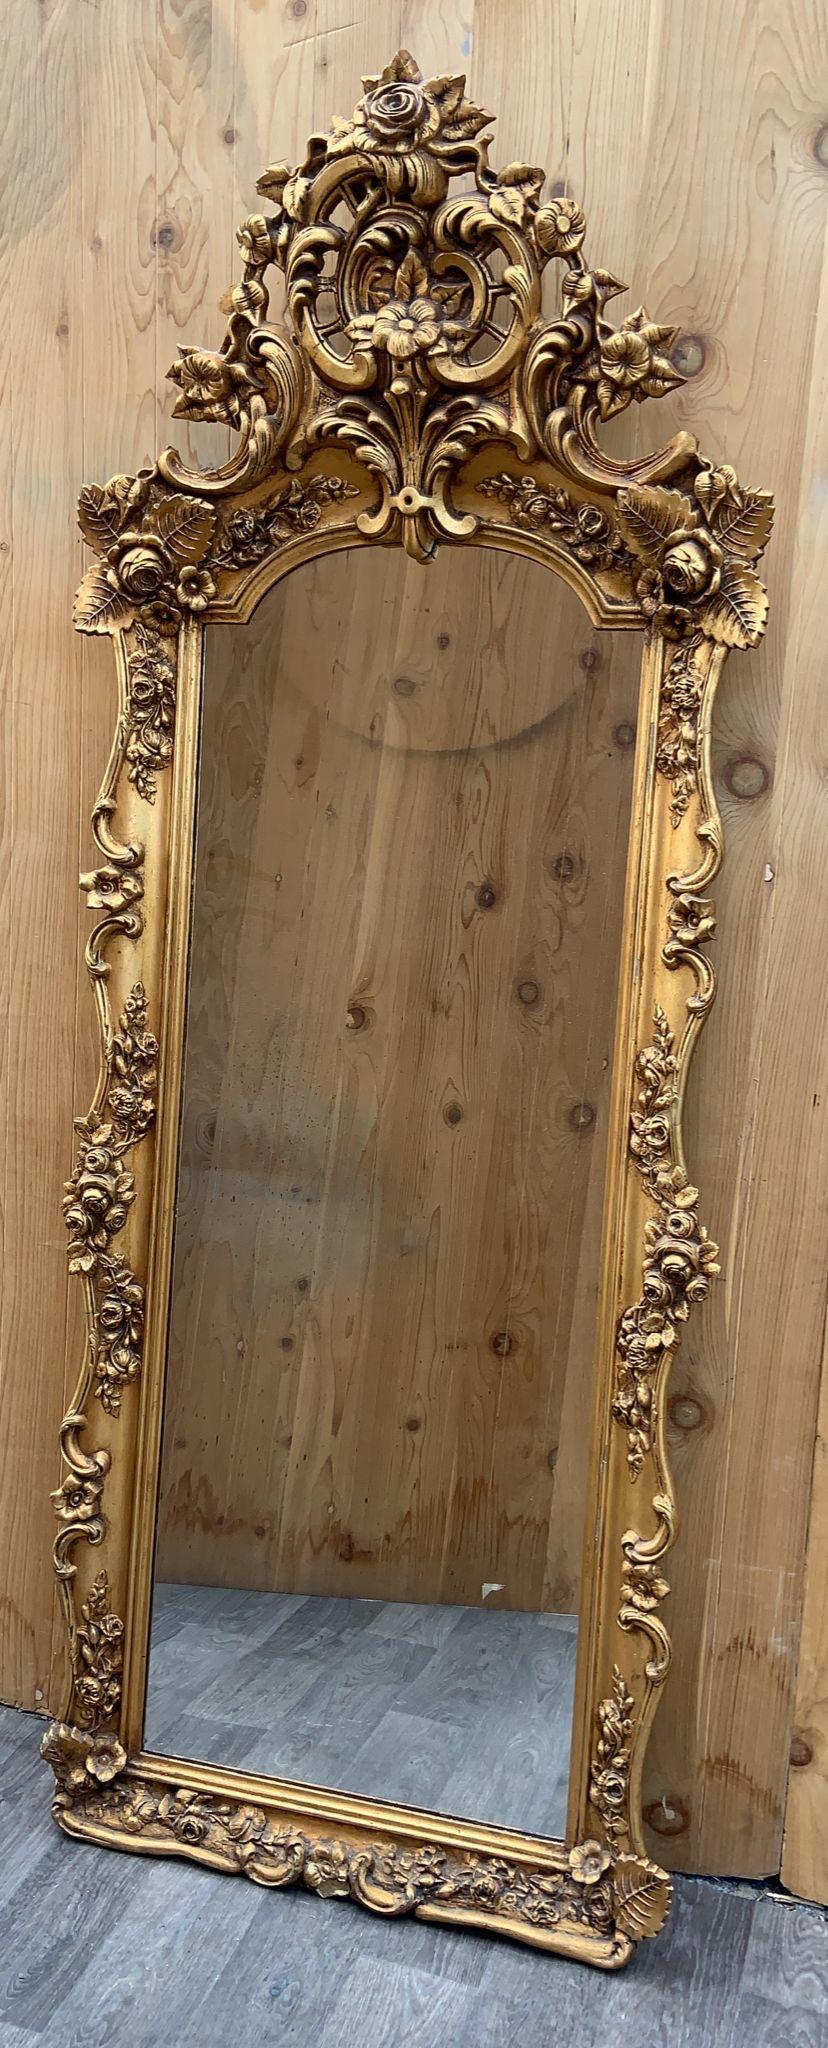 Antique Rococo Style Ornate Carved Floor Wall Mirror 

The Antique Rococo Style Ornate Carved Floor Wall Mirror is an exquisite and generously sized mirror designed in the opulent Rococo style. With a stunning gilt gold finish, this mirror boasts